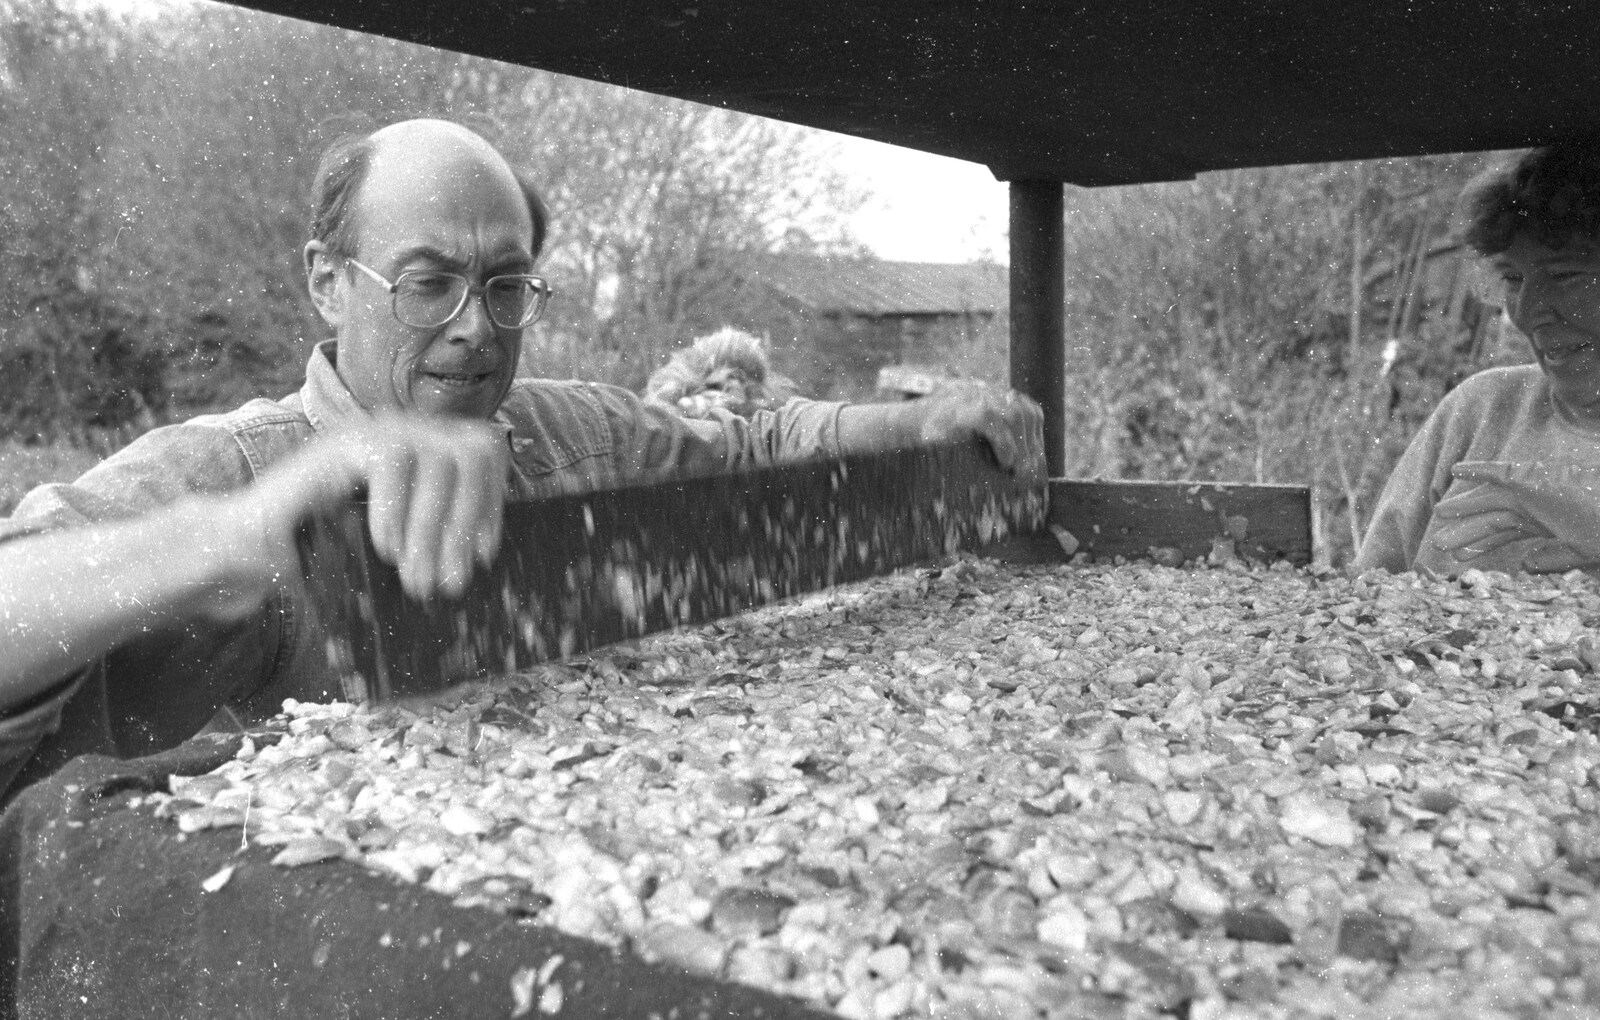 John furious tamps down apples from Cider Making in Black and White, Stuston, Suffolk - 11th October 1992